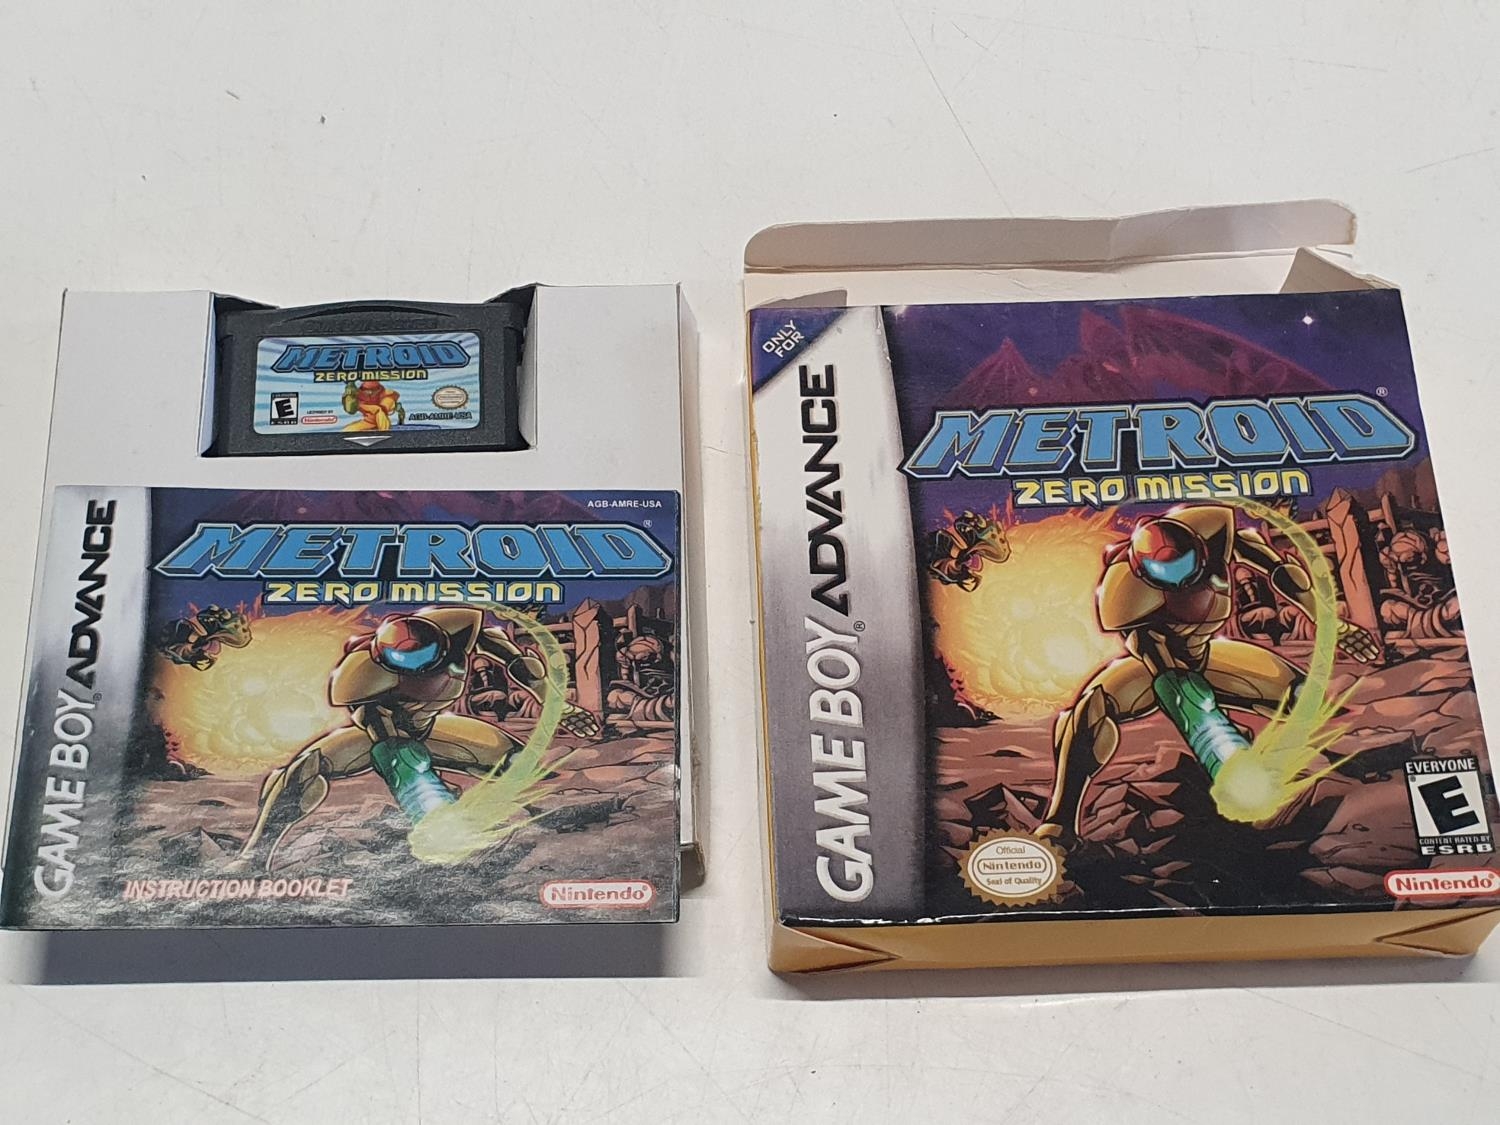 A boxed Gameboy Advance Metroid game